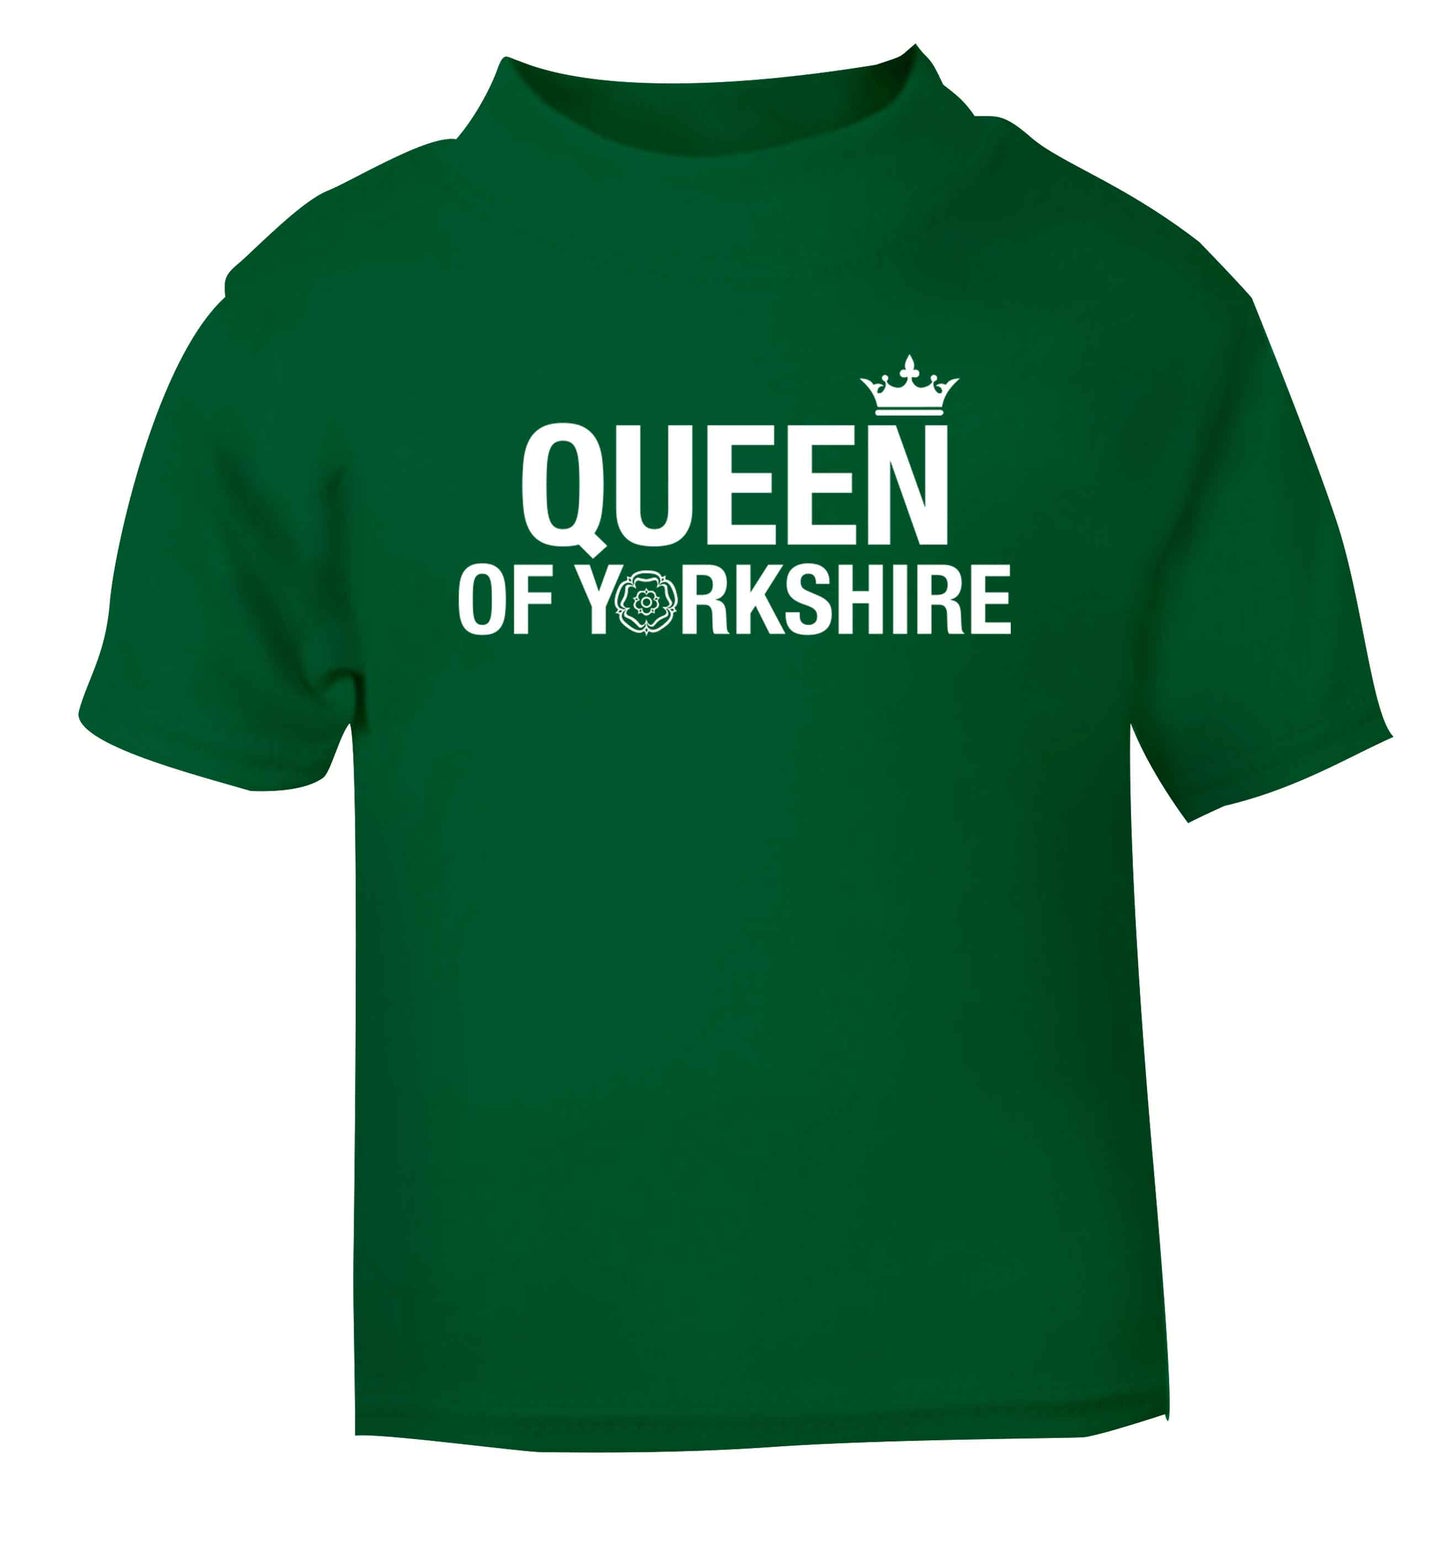 Queen of Yorkshire green Baby Toddler Tshirt 2 Years